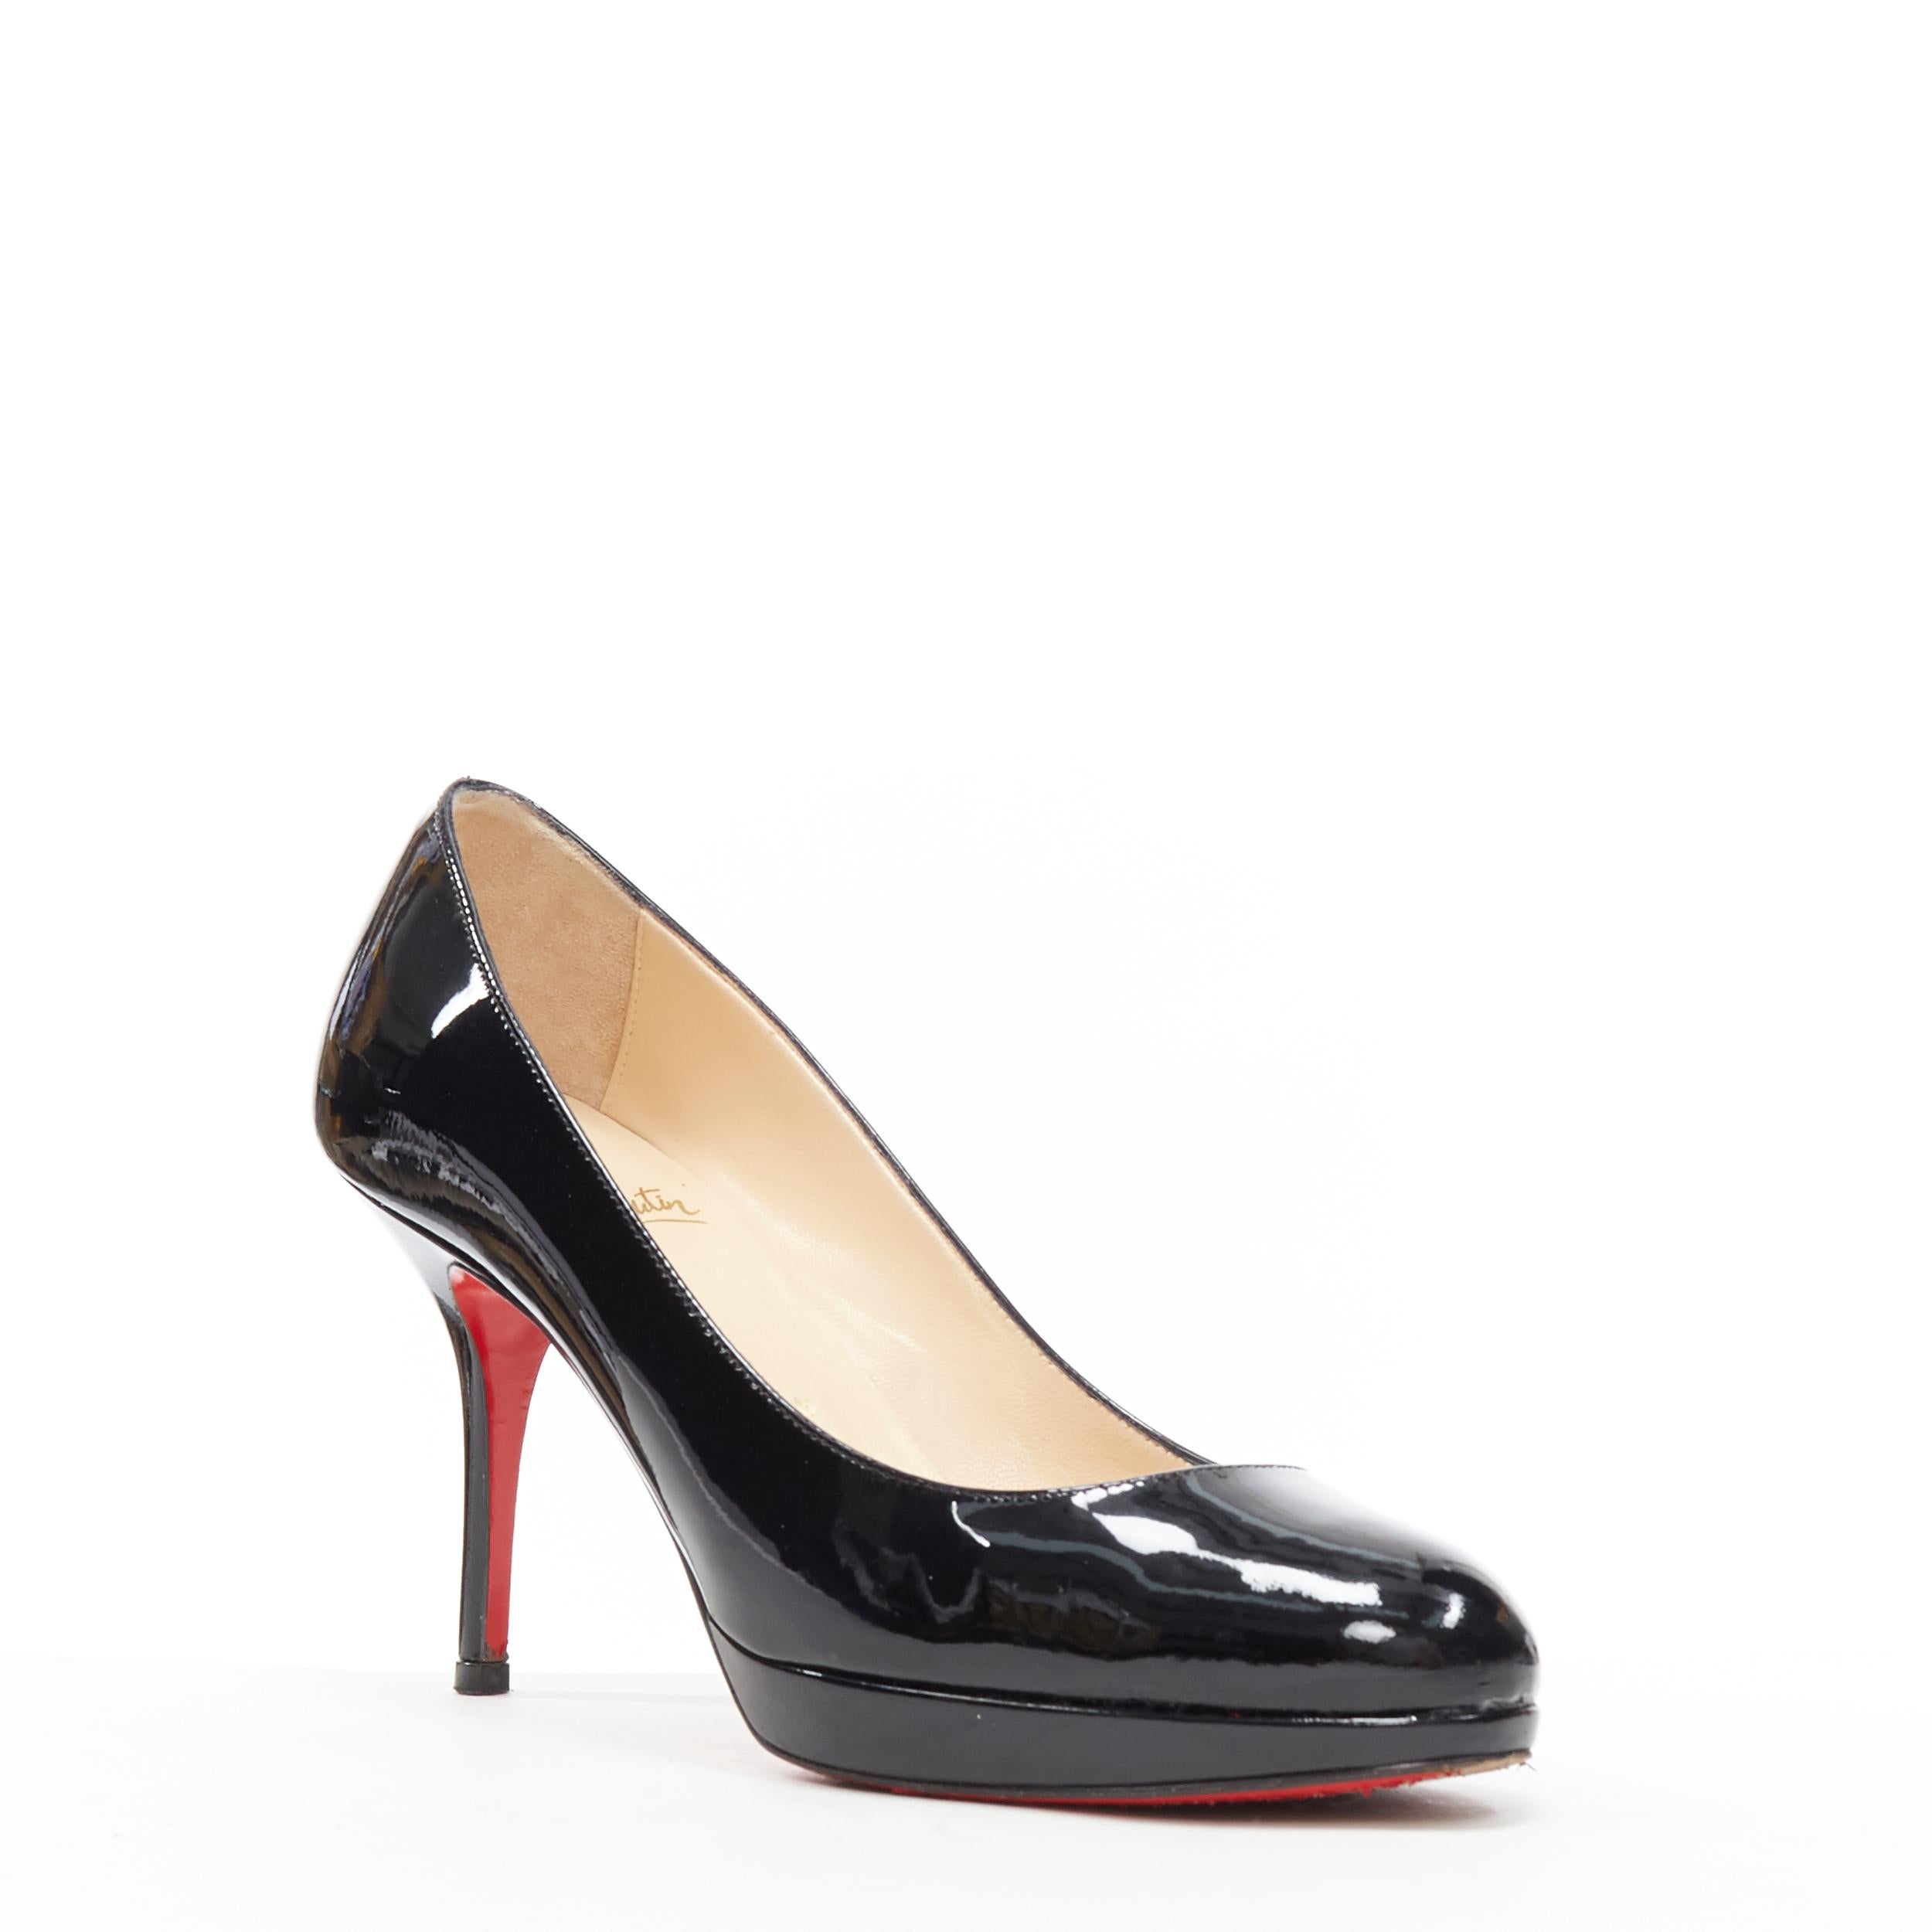 CHRISTIAN LOUBOUTIN black patent platform round toe high heel pump EU36
Brand: Christian Louboutin
Designer: Christian Louboutin
Model Name / Style: Platform pump
Material: Leather
Color: Black
Pattern: Solid
Extra Detail: High (3-3.9 in) heel